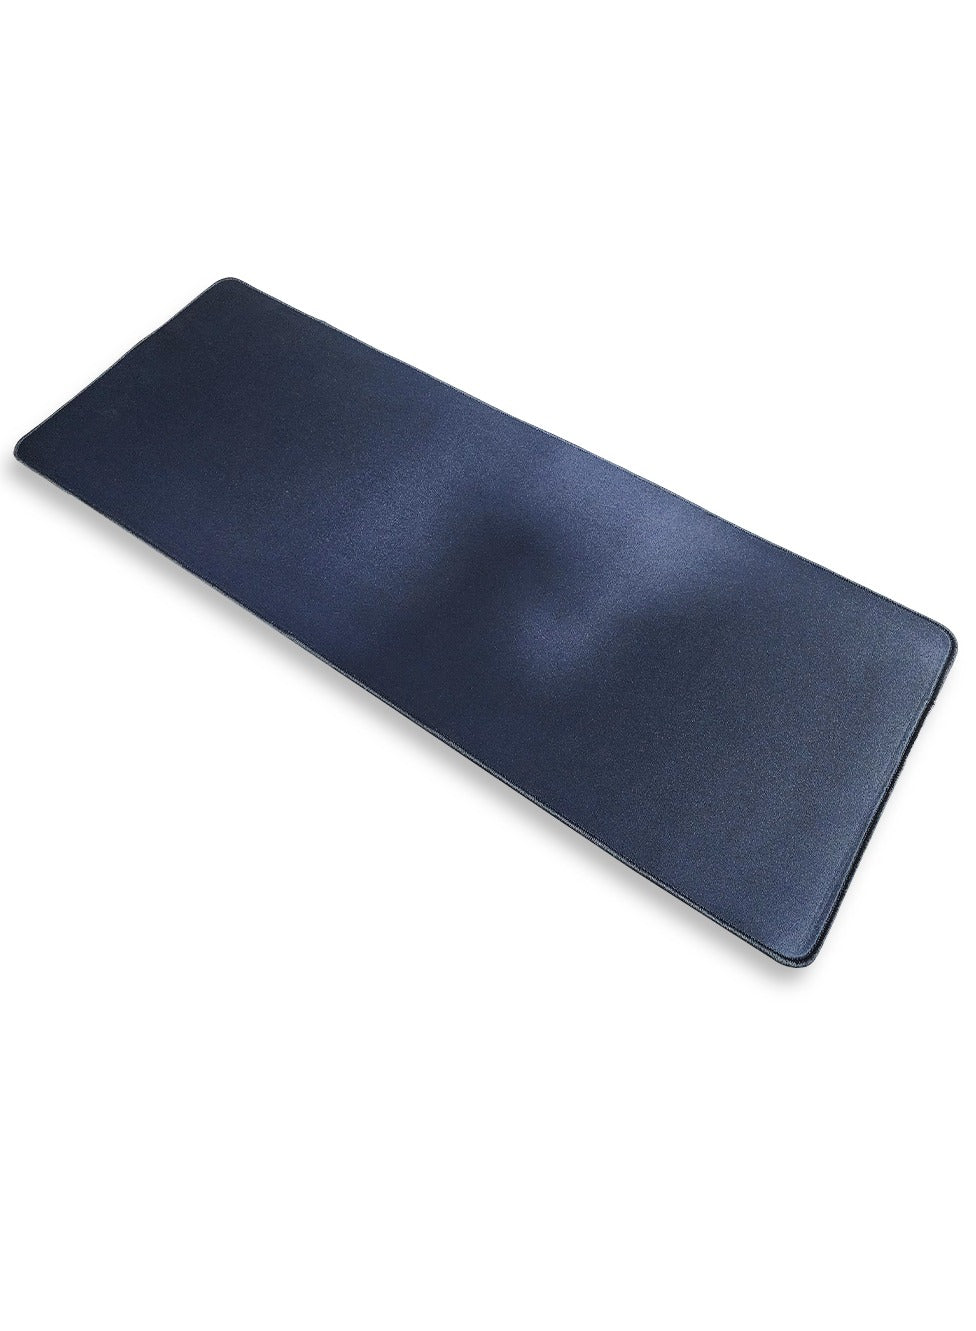 Gaming Mouse Pad - Size 80X30 CM - Stitched Edges Anti-slip rubber base - Optimized for all mouse sensitivities and sensors - Model Mix Pads KK6